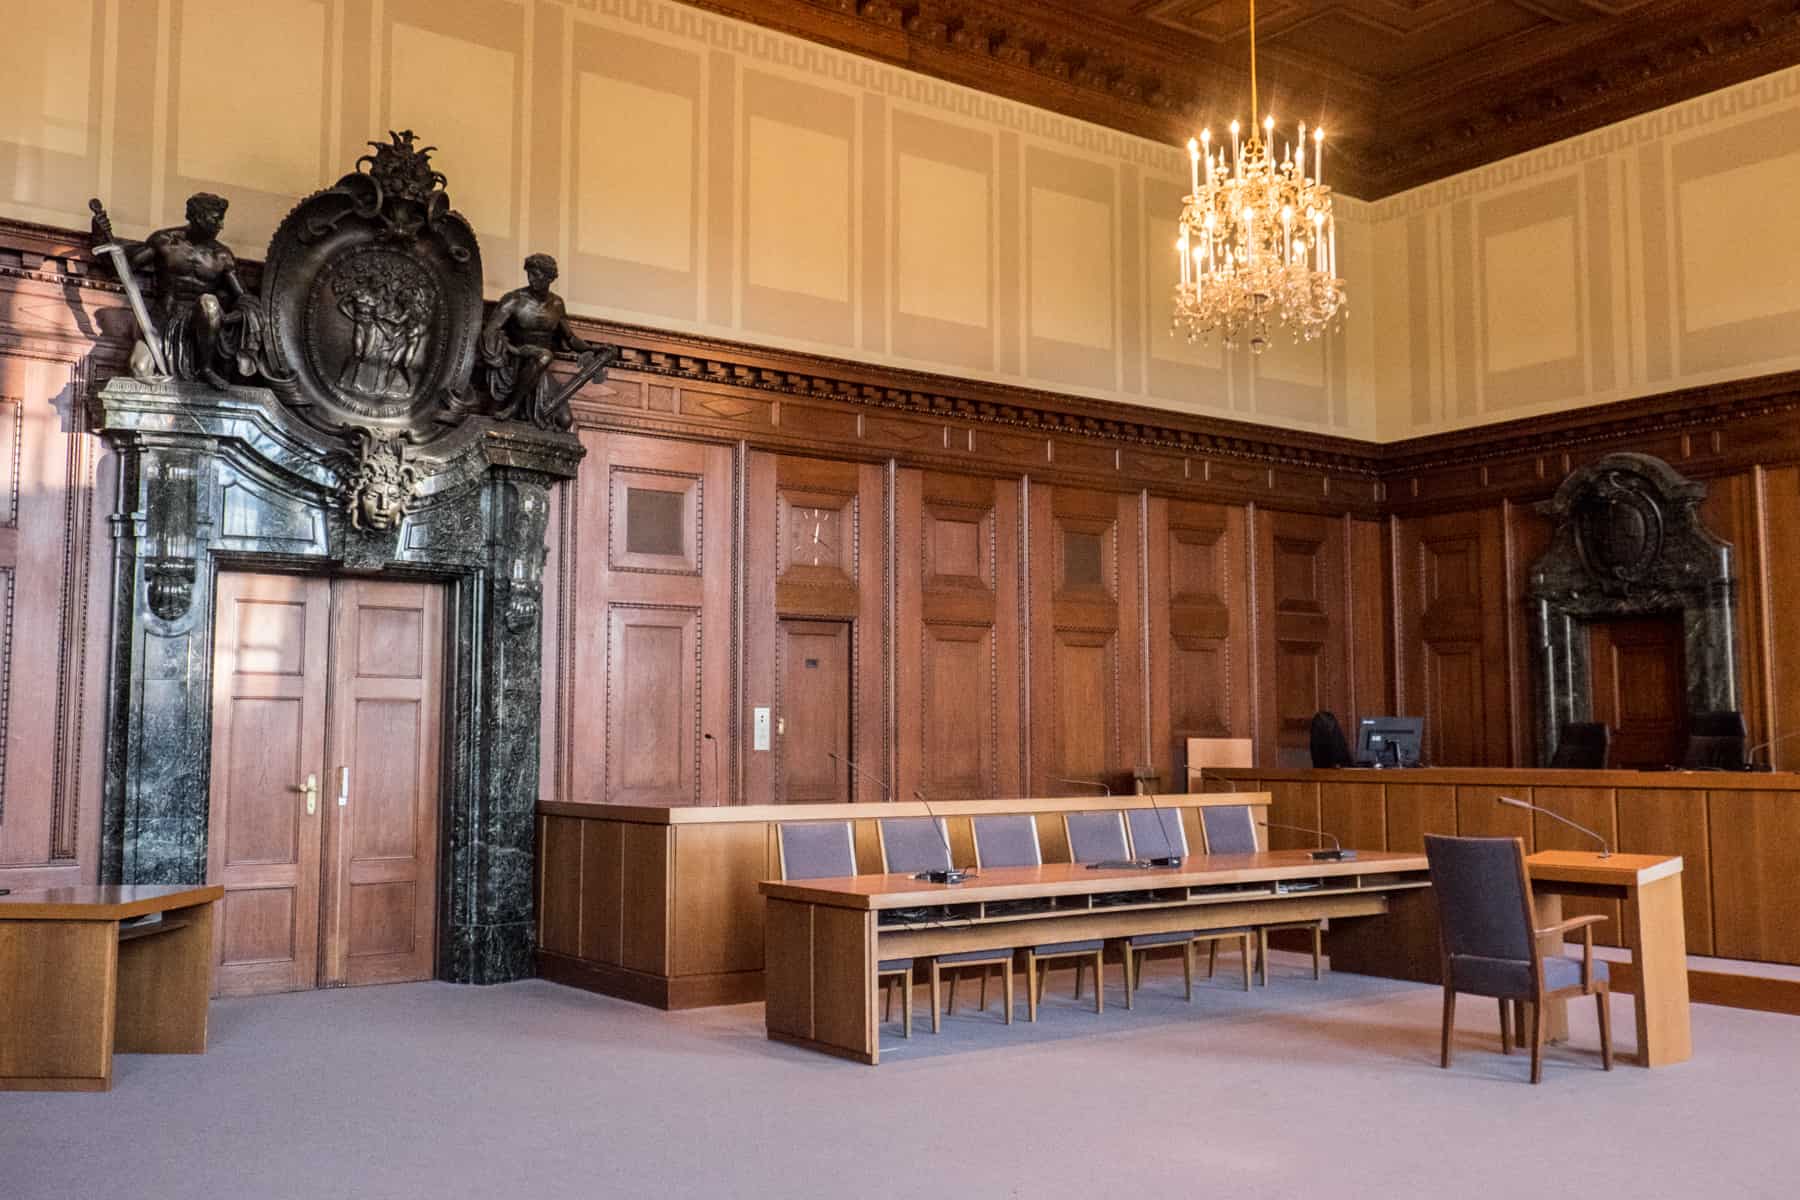 The dark wood clad interior and hearing bench inside Courtroom 600, where the Nuremberg Trials took place